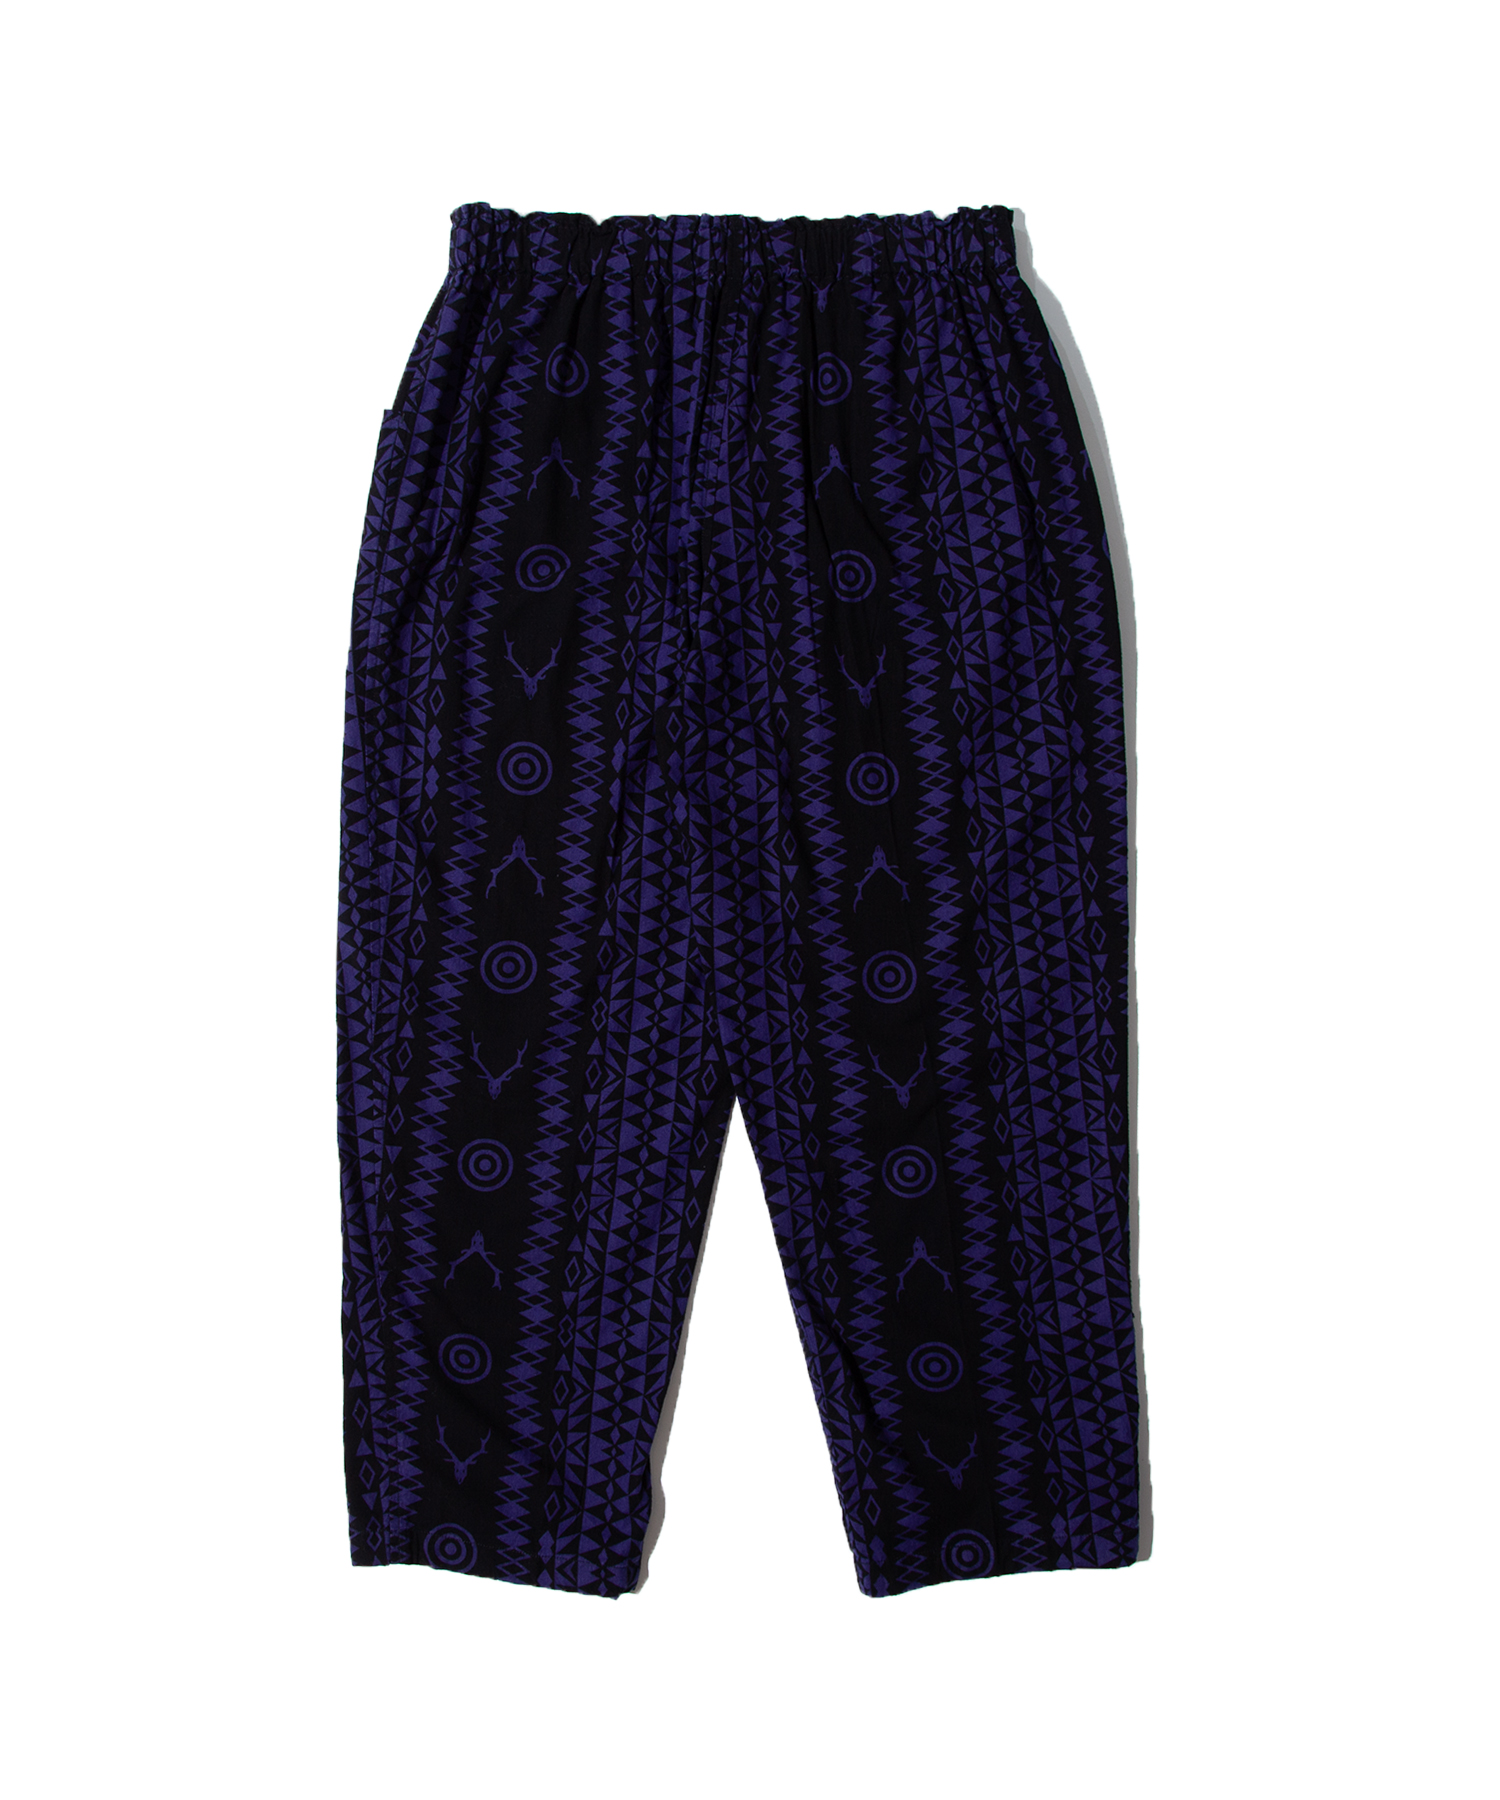 South2 West8 Army String pant-Flannel Cloth/Printed / サウスツー